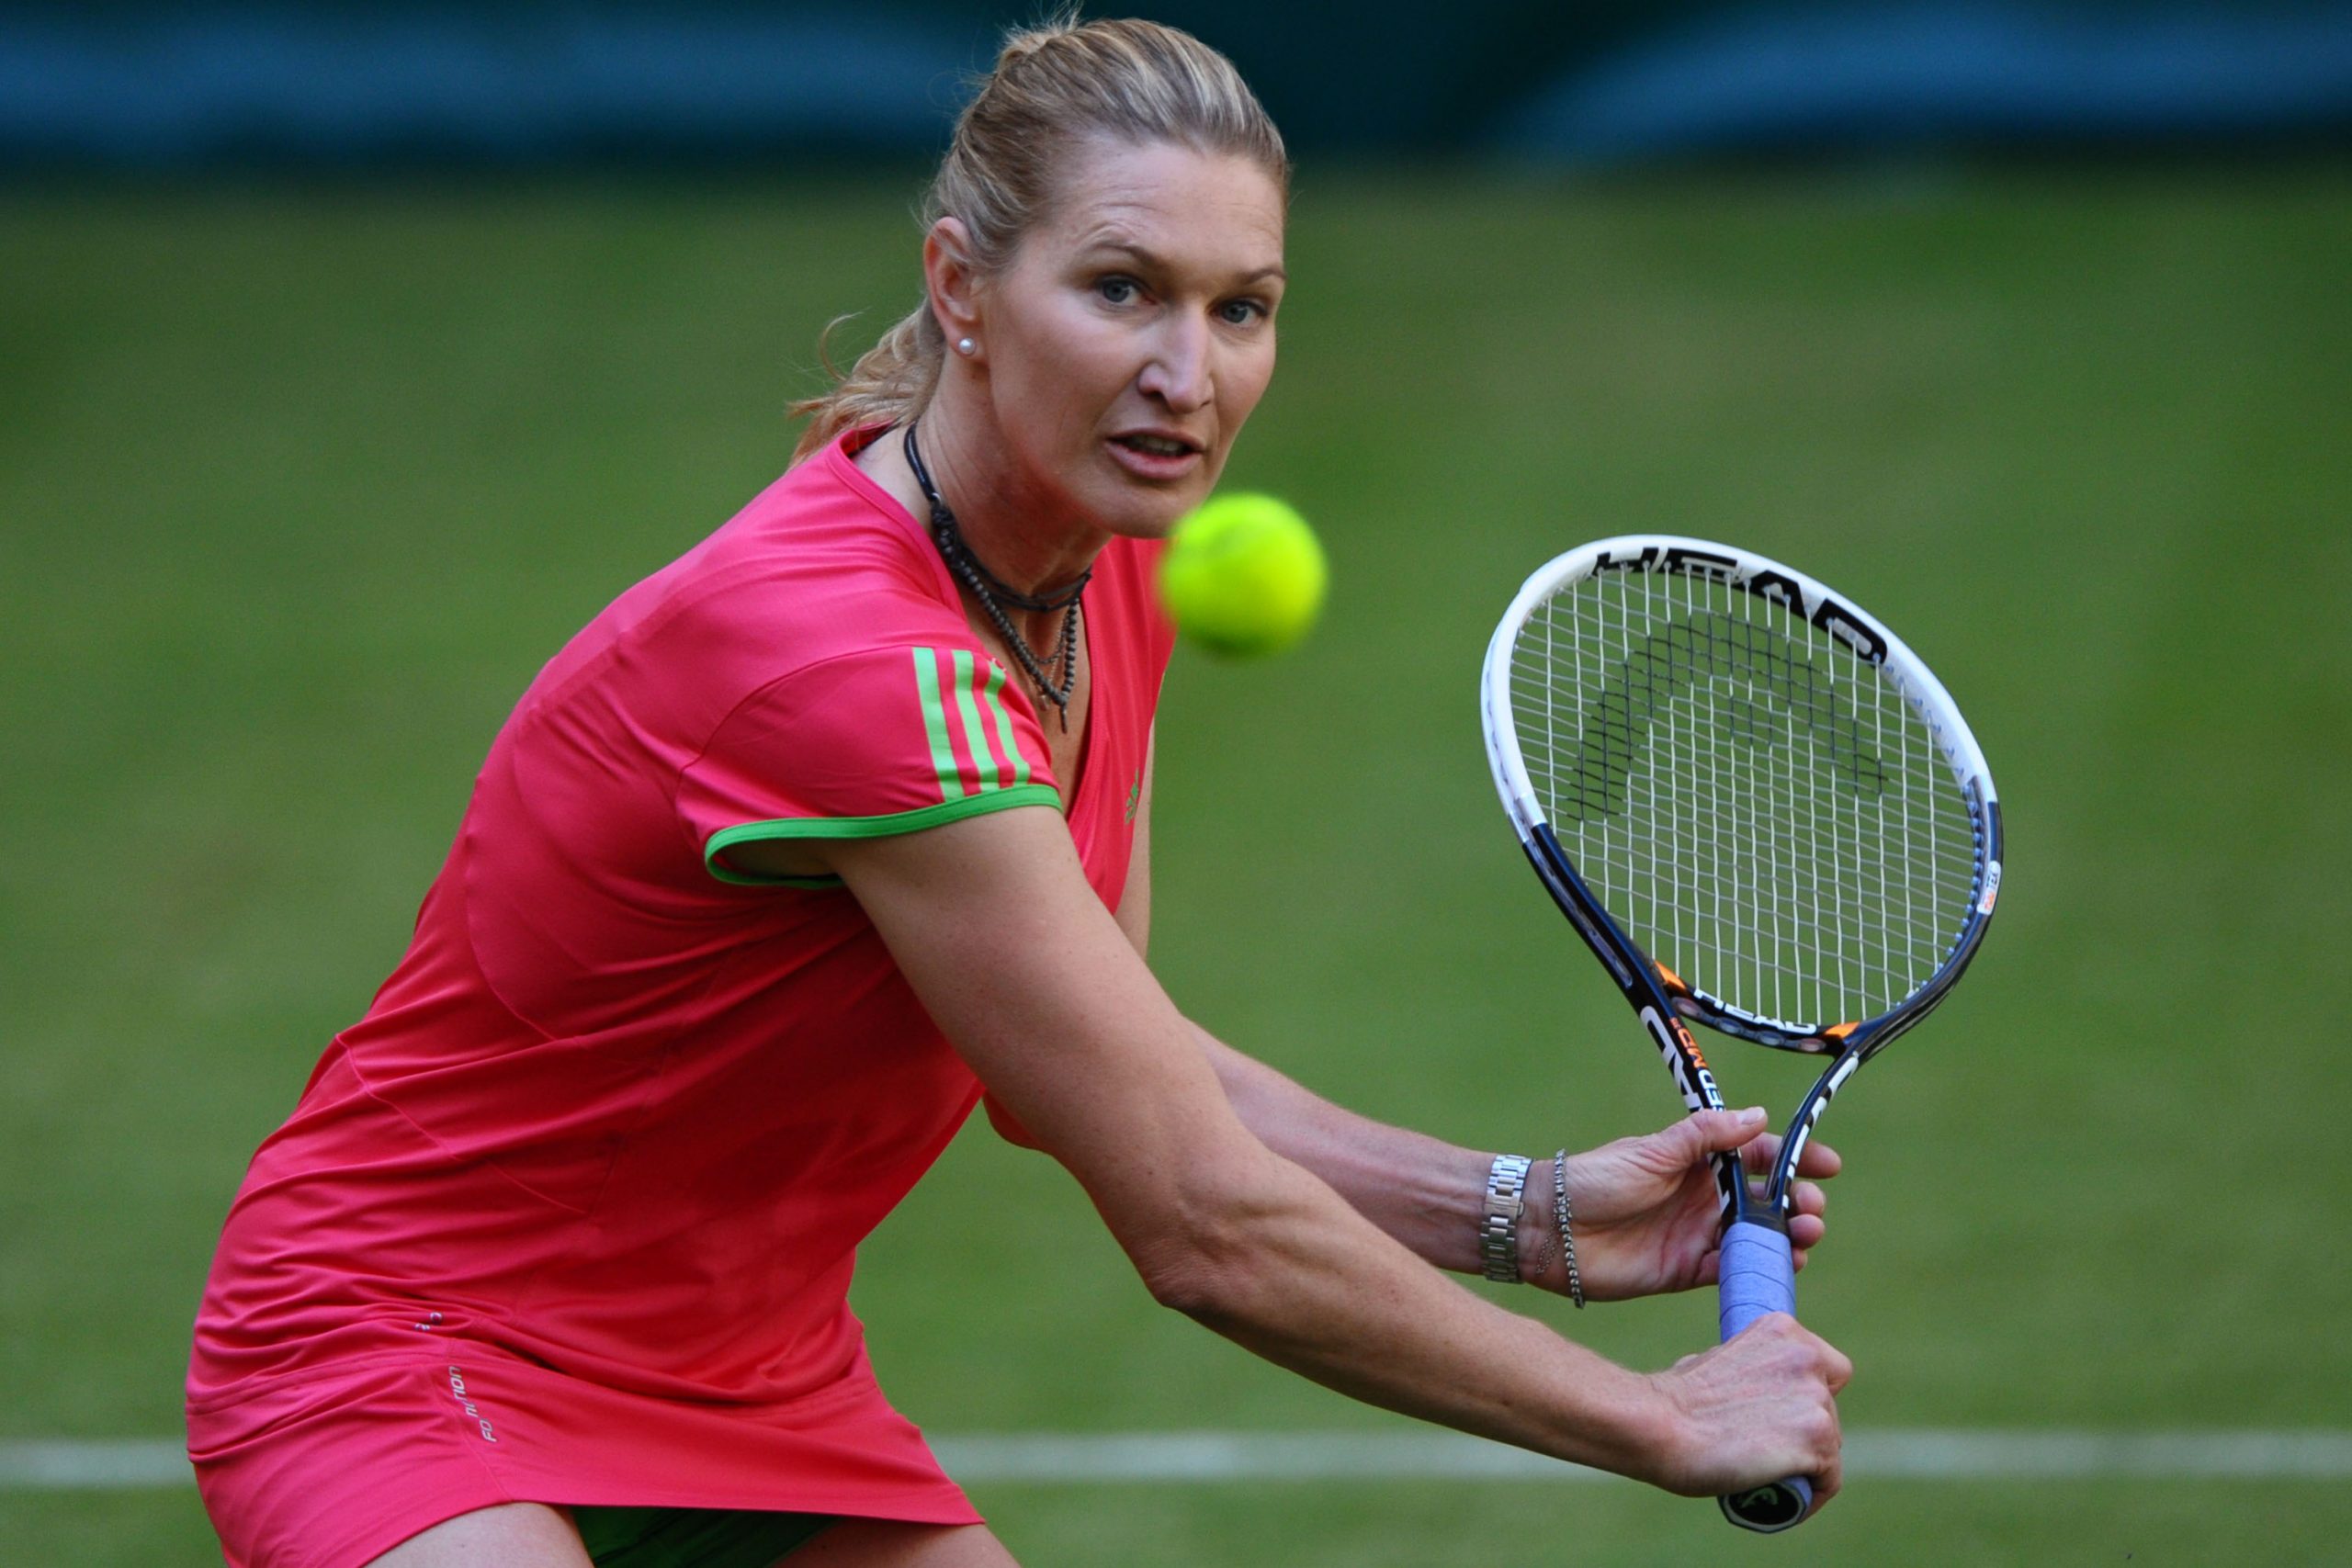 Former World No.1 Steffi Graf is the only player in the history of tennis to win the Golden Slam, more popularly known as Calendar Year Golden Slam